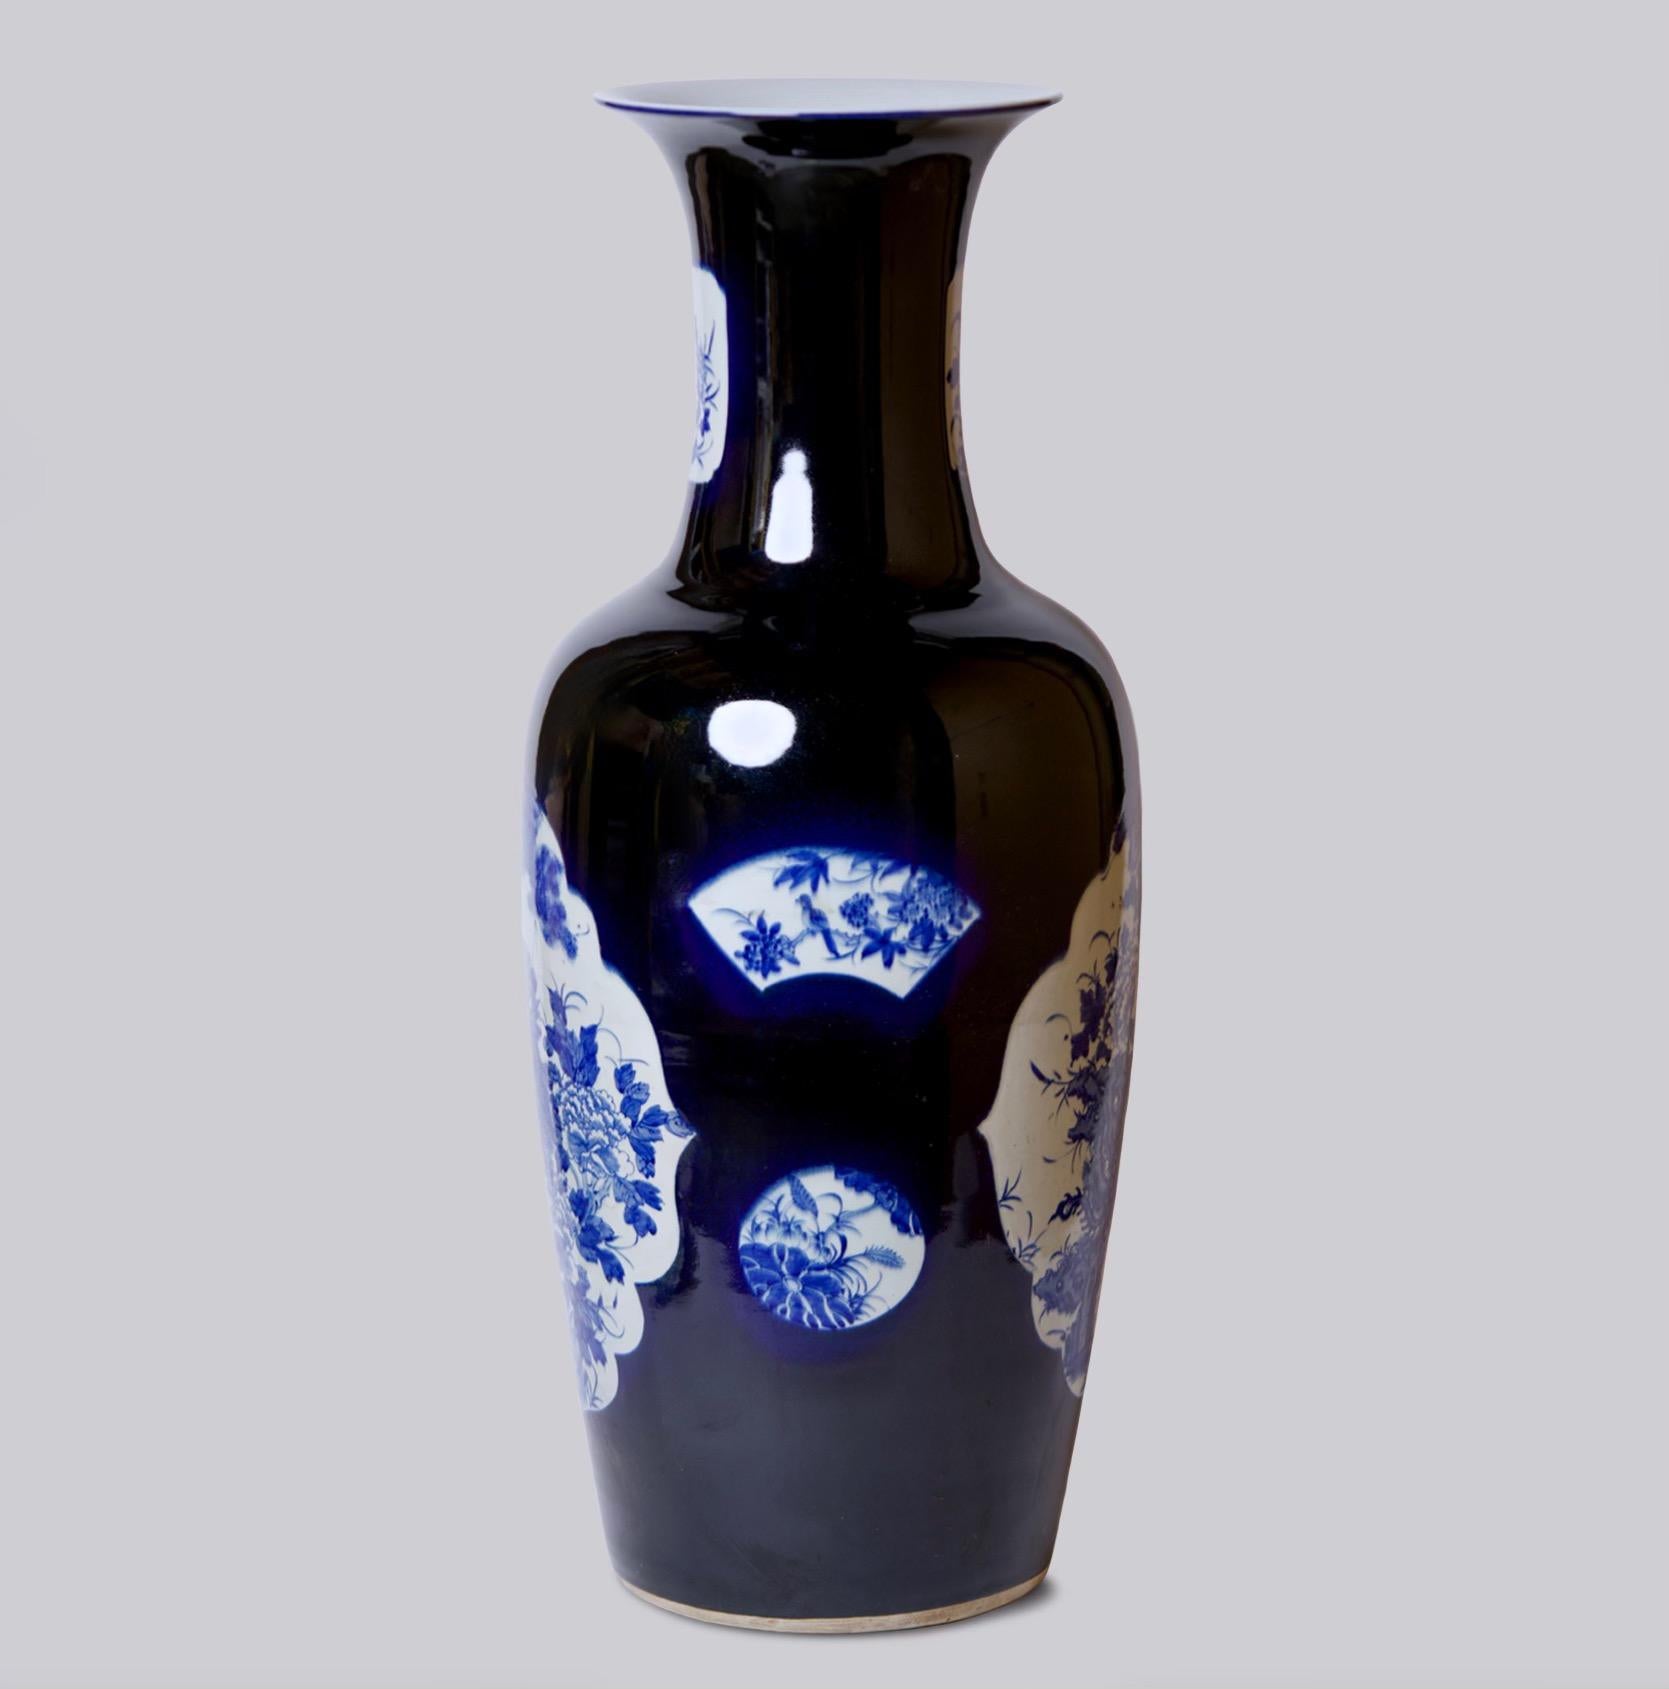 This vase is a traditional porcelain vessel from Jingdezhen, a town long distinguished by imperial patronage. An uncommon blue field and floral panels set this vase apart from the blue and white we most commonly see. The lively floral still life